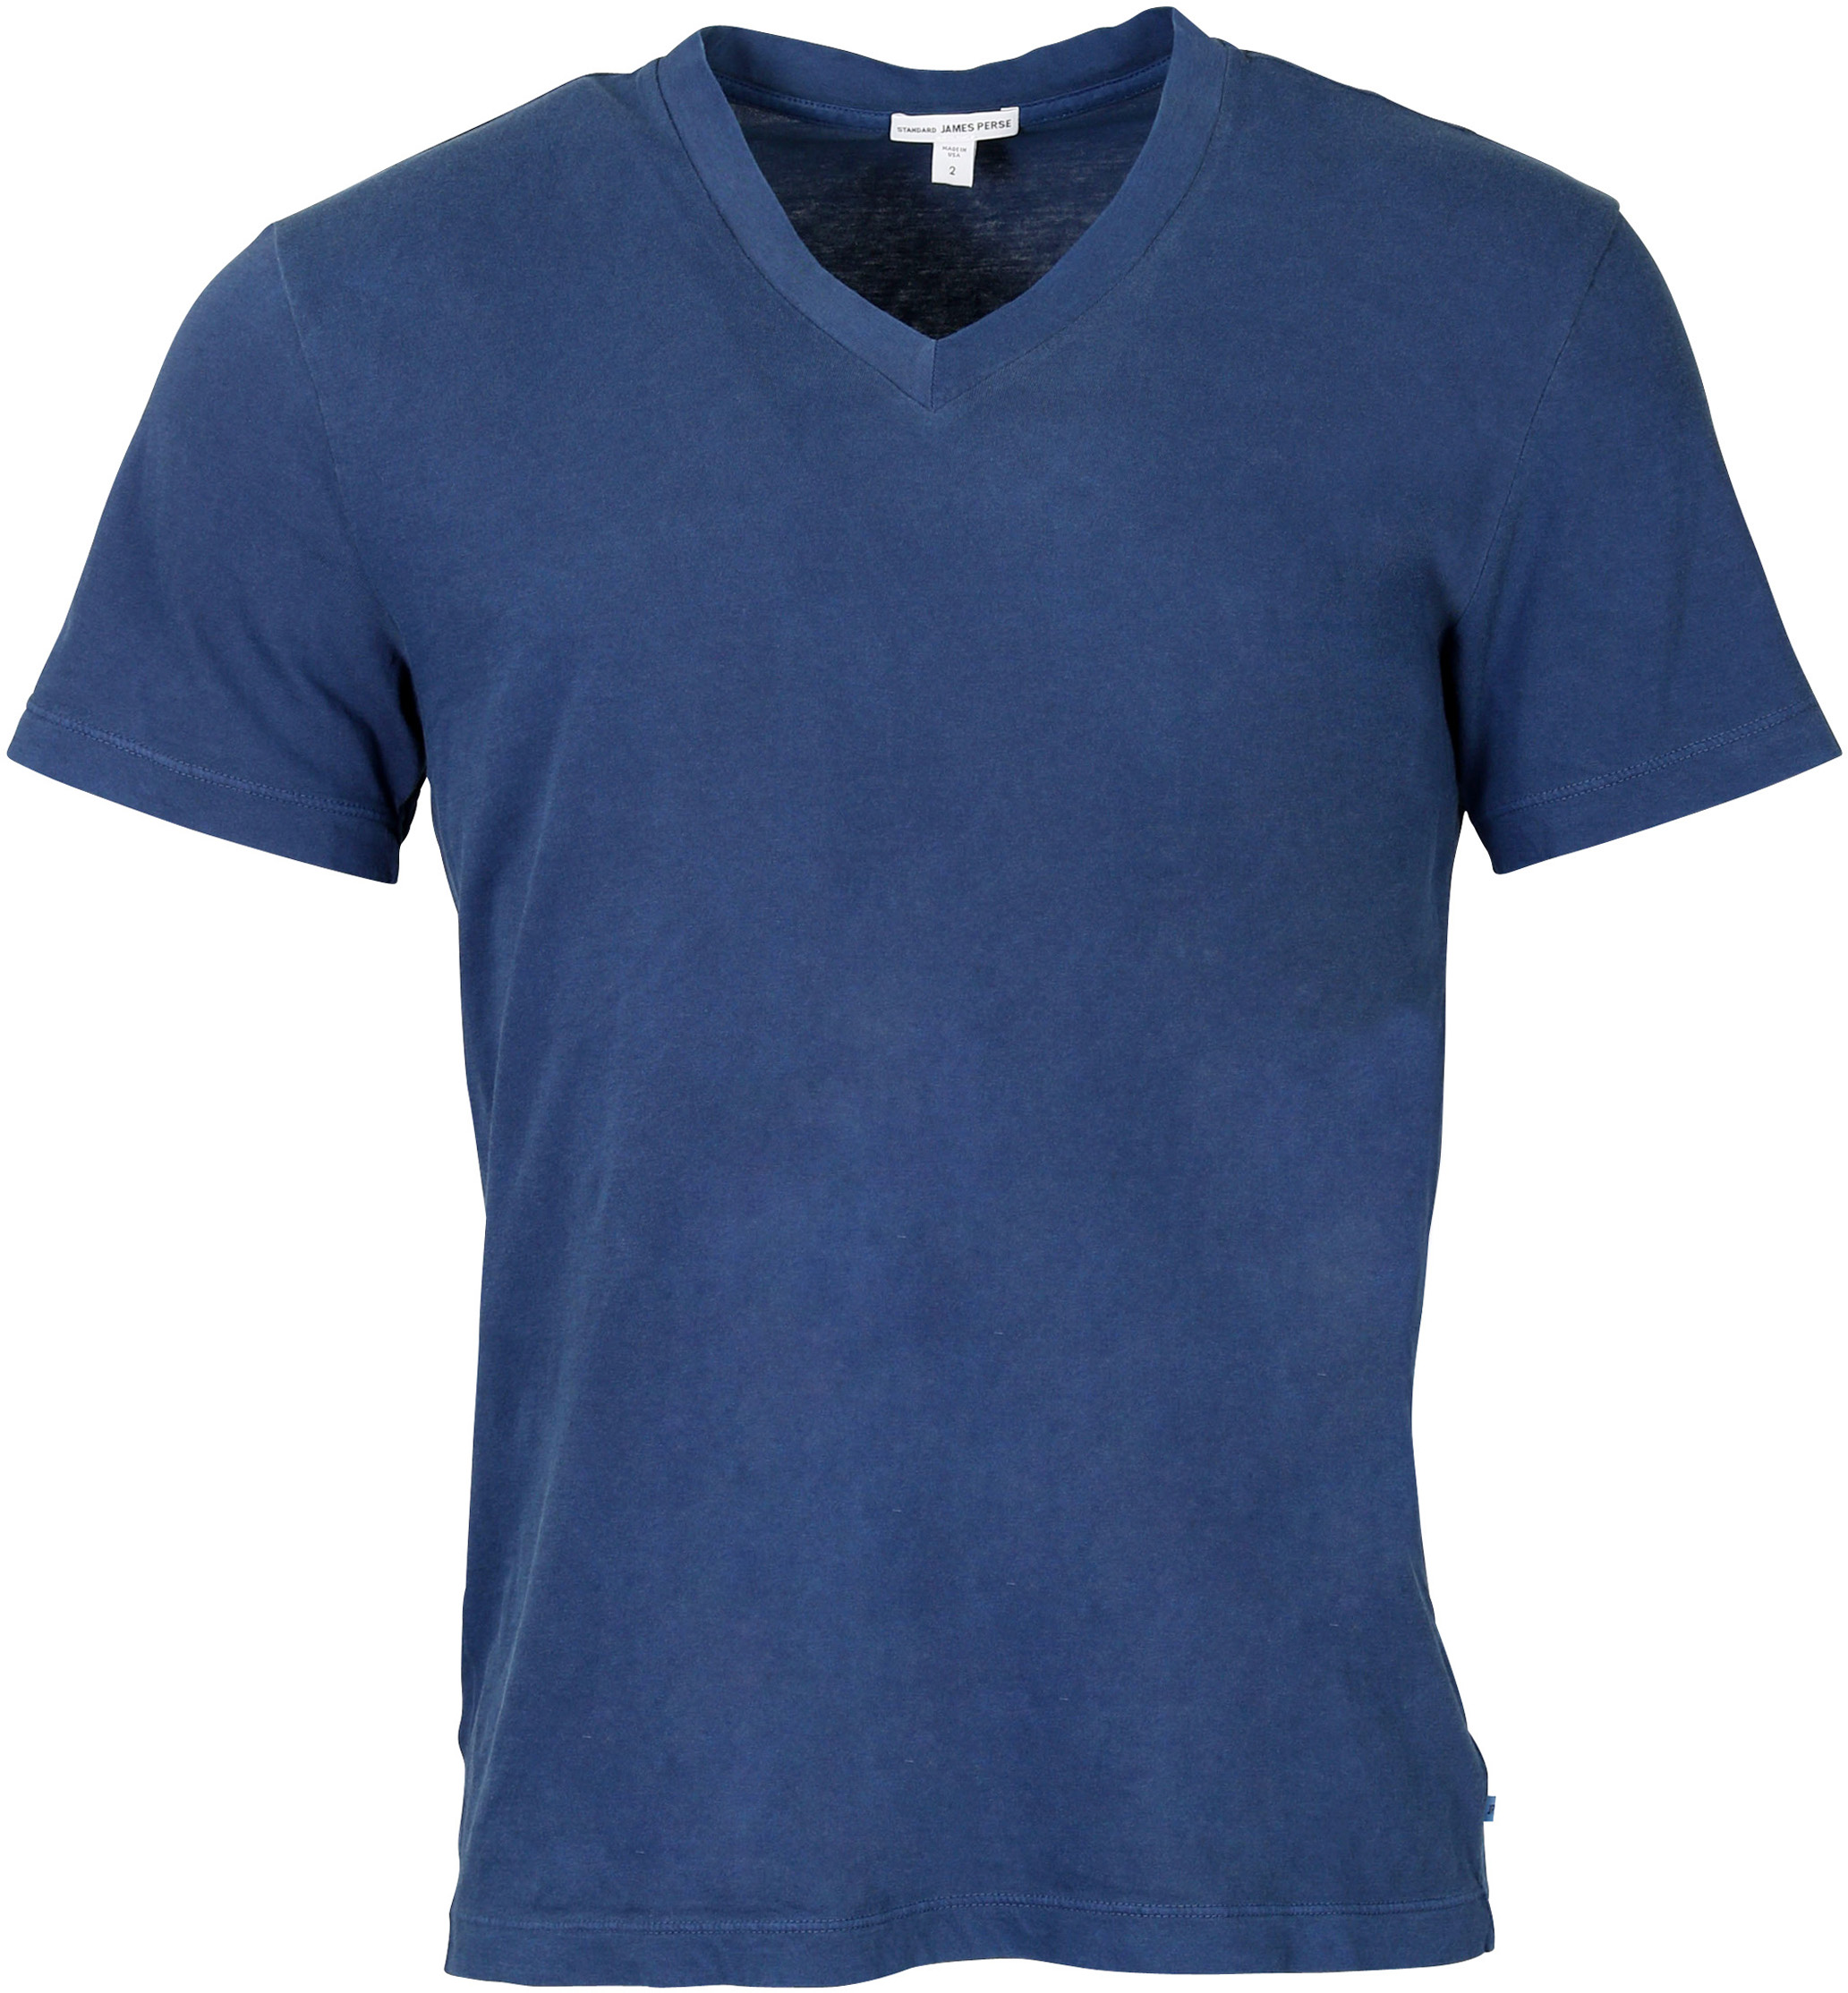 James Perse T-Shirt V-Neck Mid Blue S